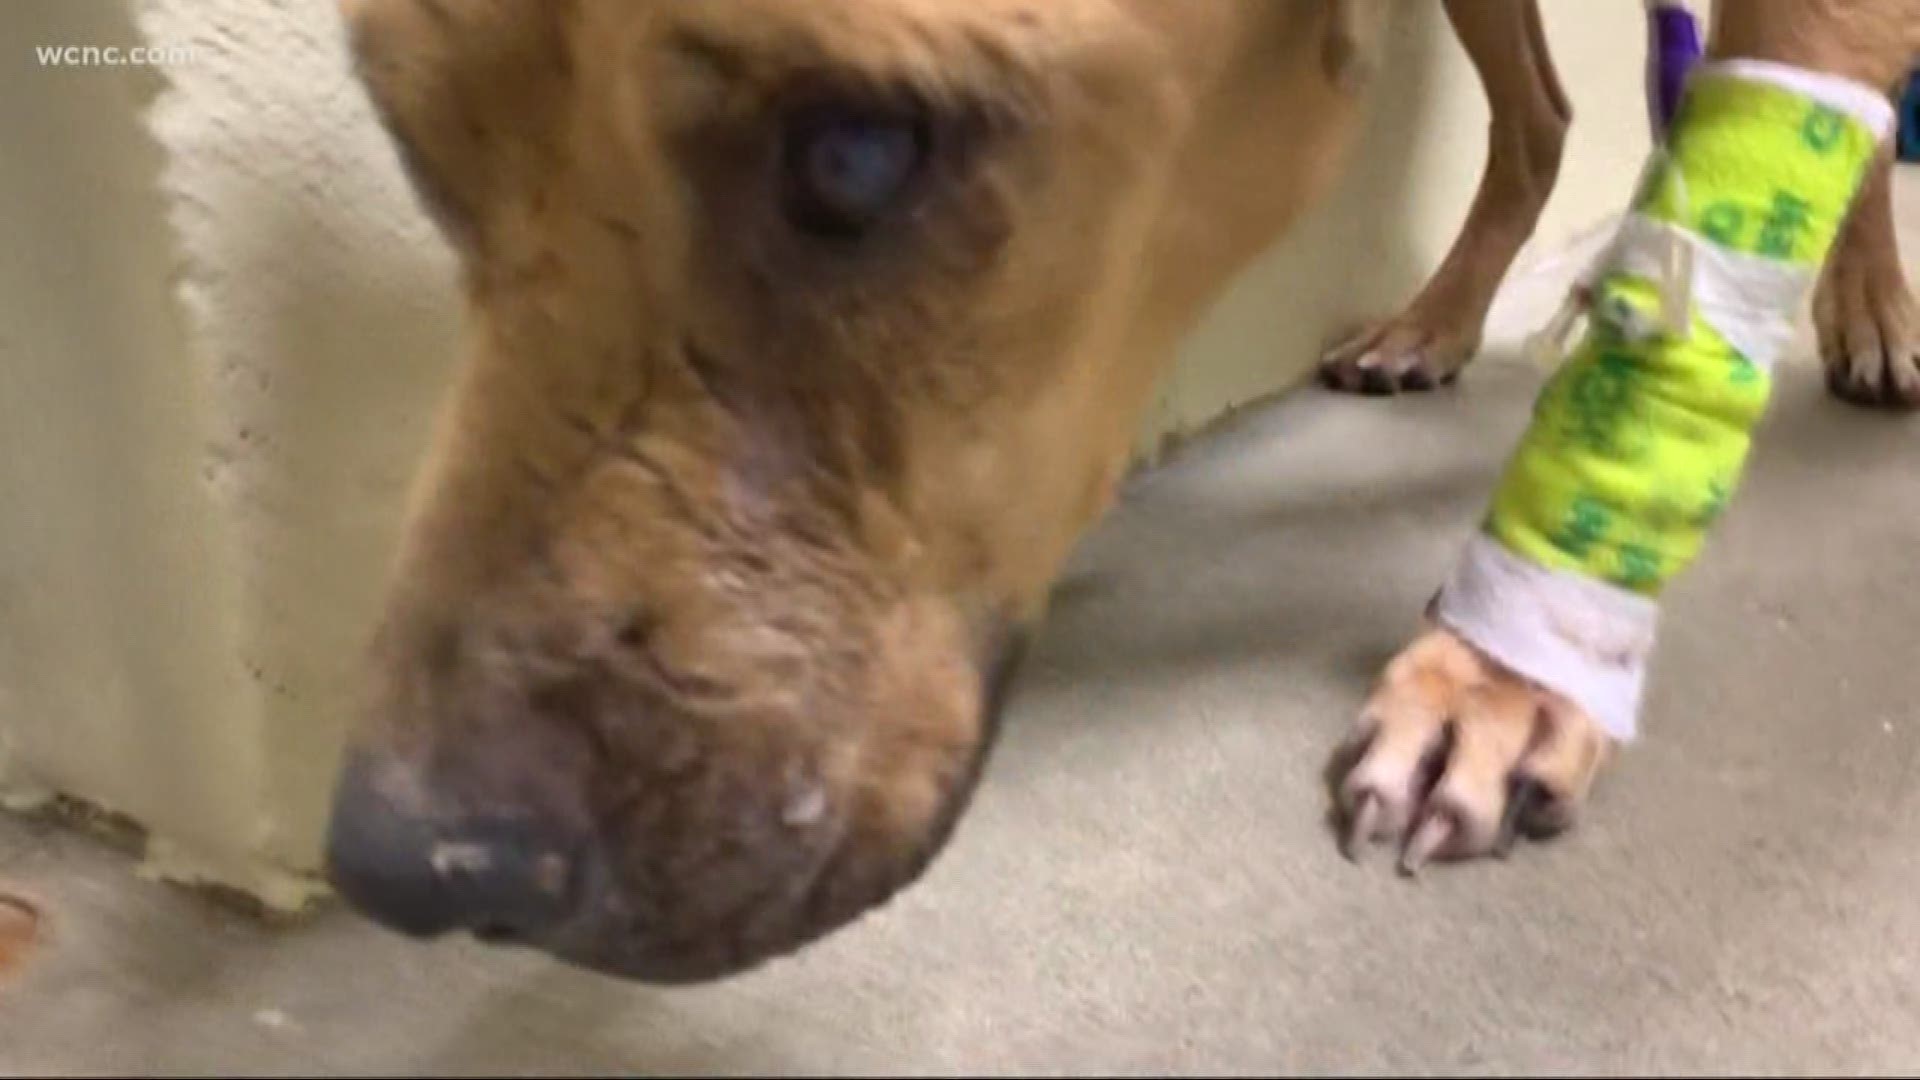 Buddy was captured hearts across the country since he was rescued. He may end up losing an eye, leg and part of his tail, but he's in good spirits. His caretakers say he'll be up for adoption soon through the Lancaster County SPCA.